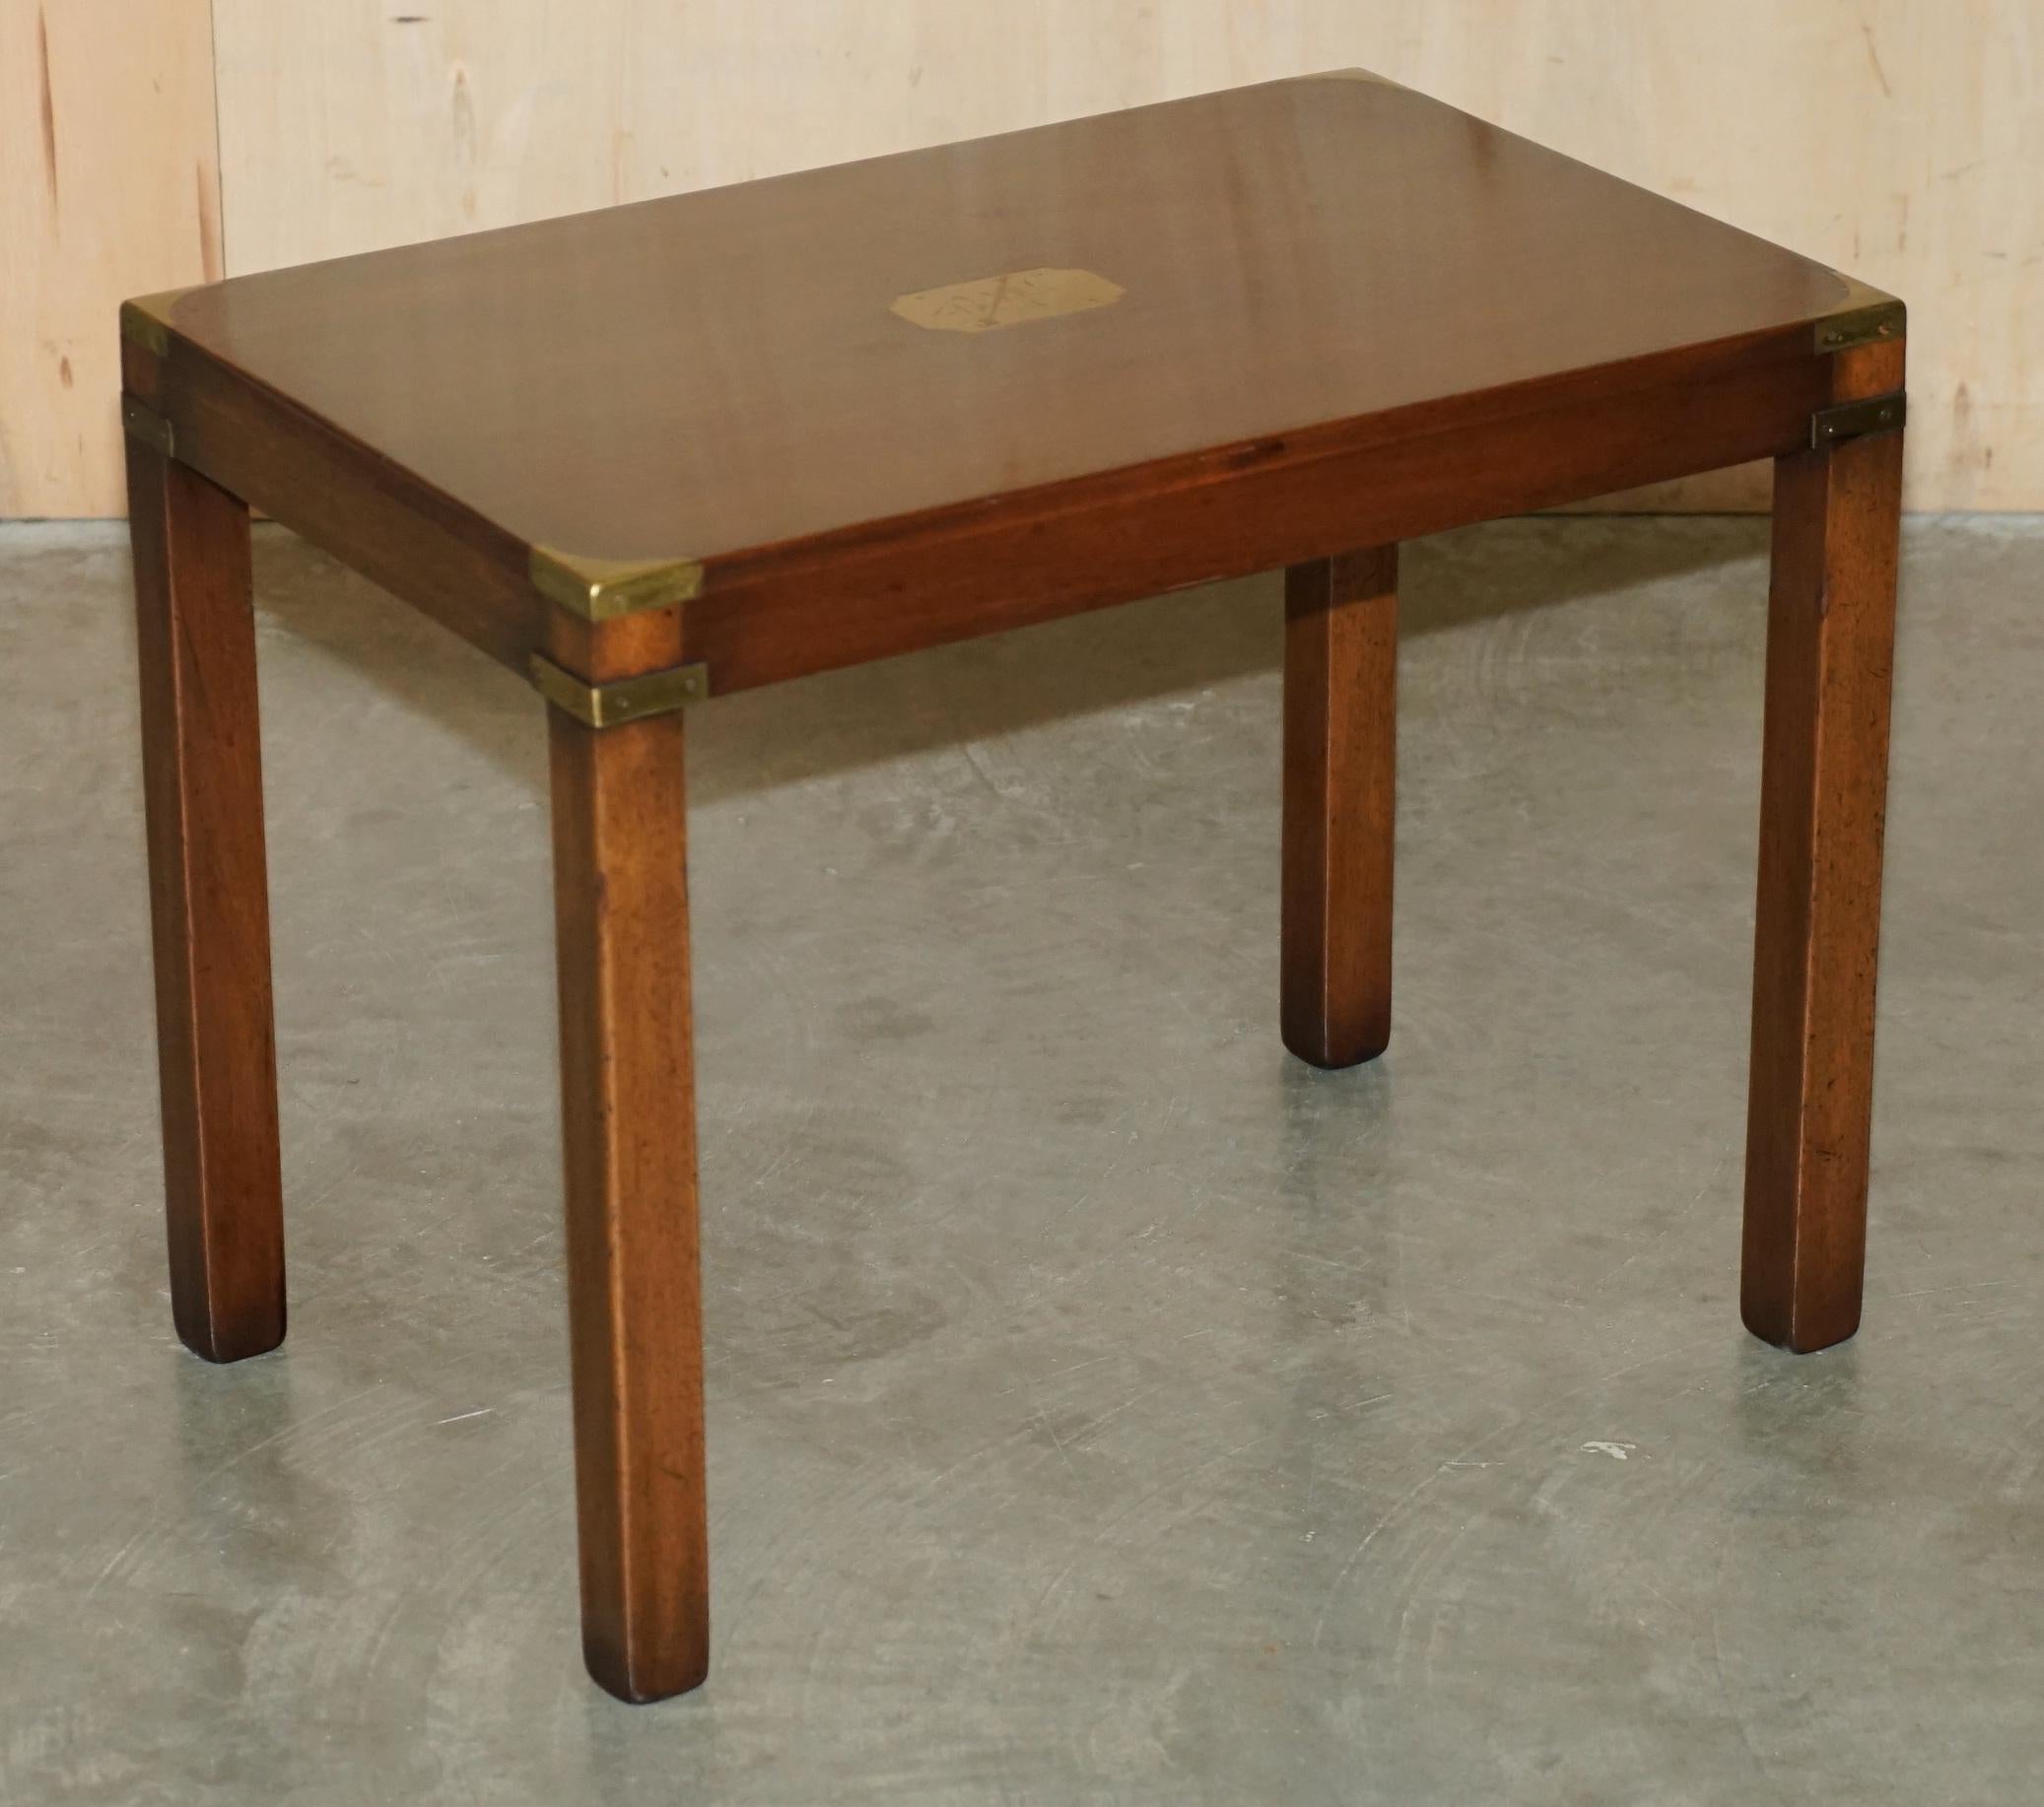 RESTORED HARRODS KENNEDY COFFEE & SiDE TABLE NEST OF TABLES MILITARY CAMPAIGN (Handgefertigt) im Angebot